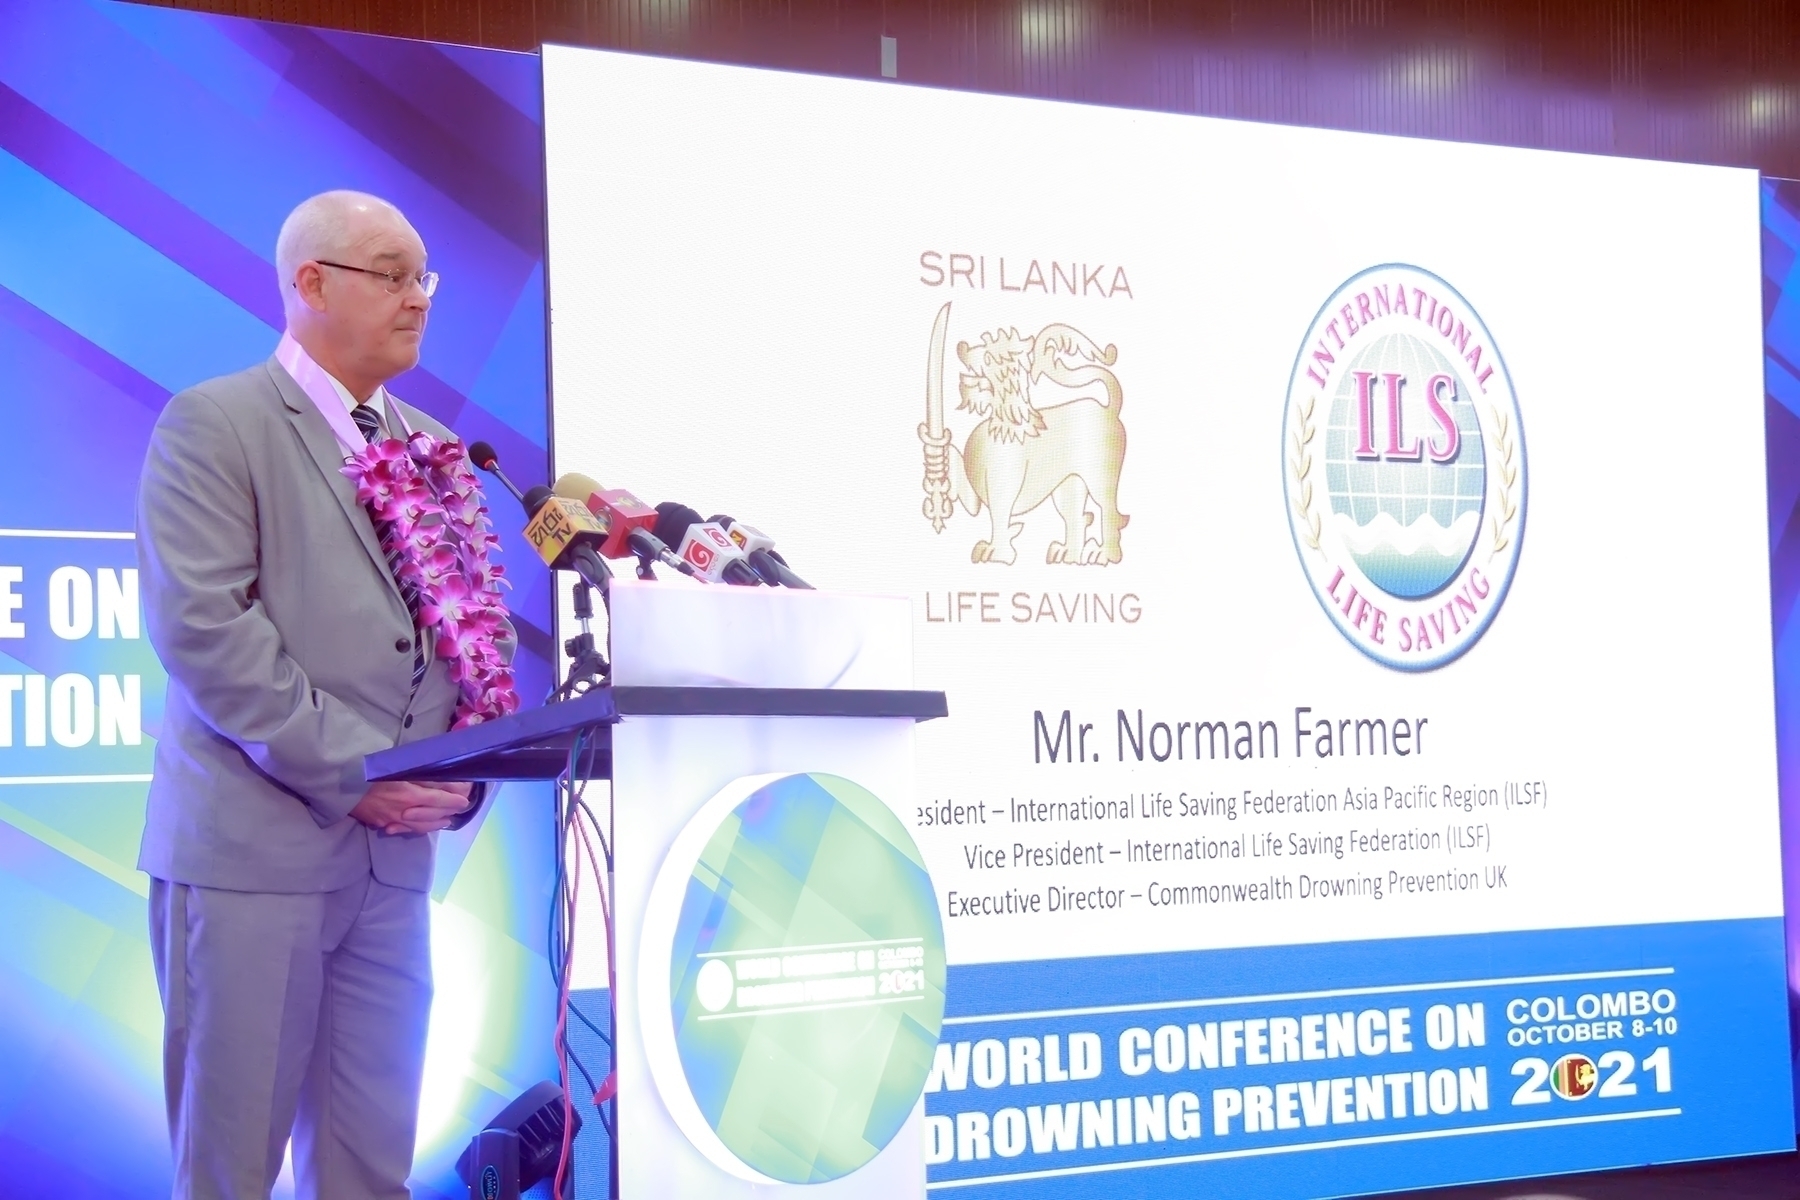 World Conference on Drowning Prevention-2021 event launch held in  Sri Lanka